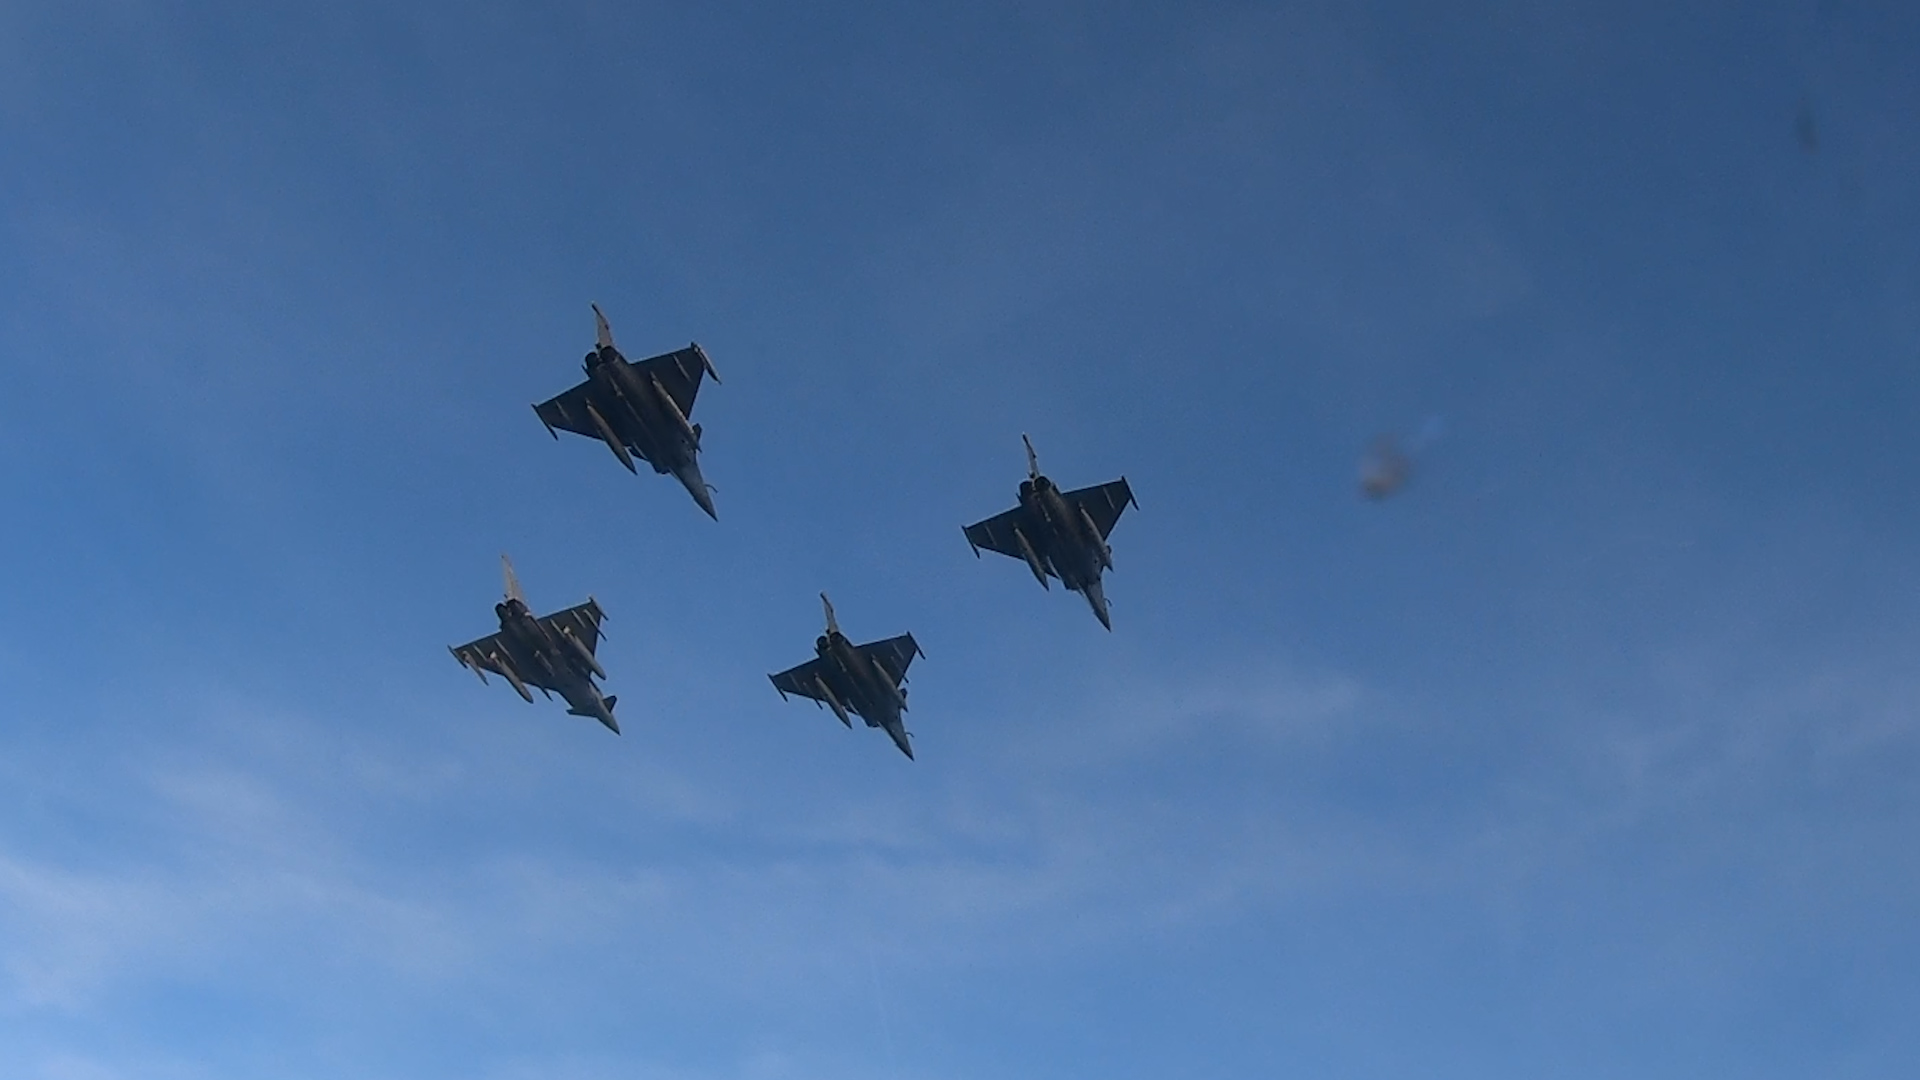 Image shows four RAF Typhoon flying in formation.